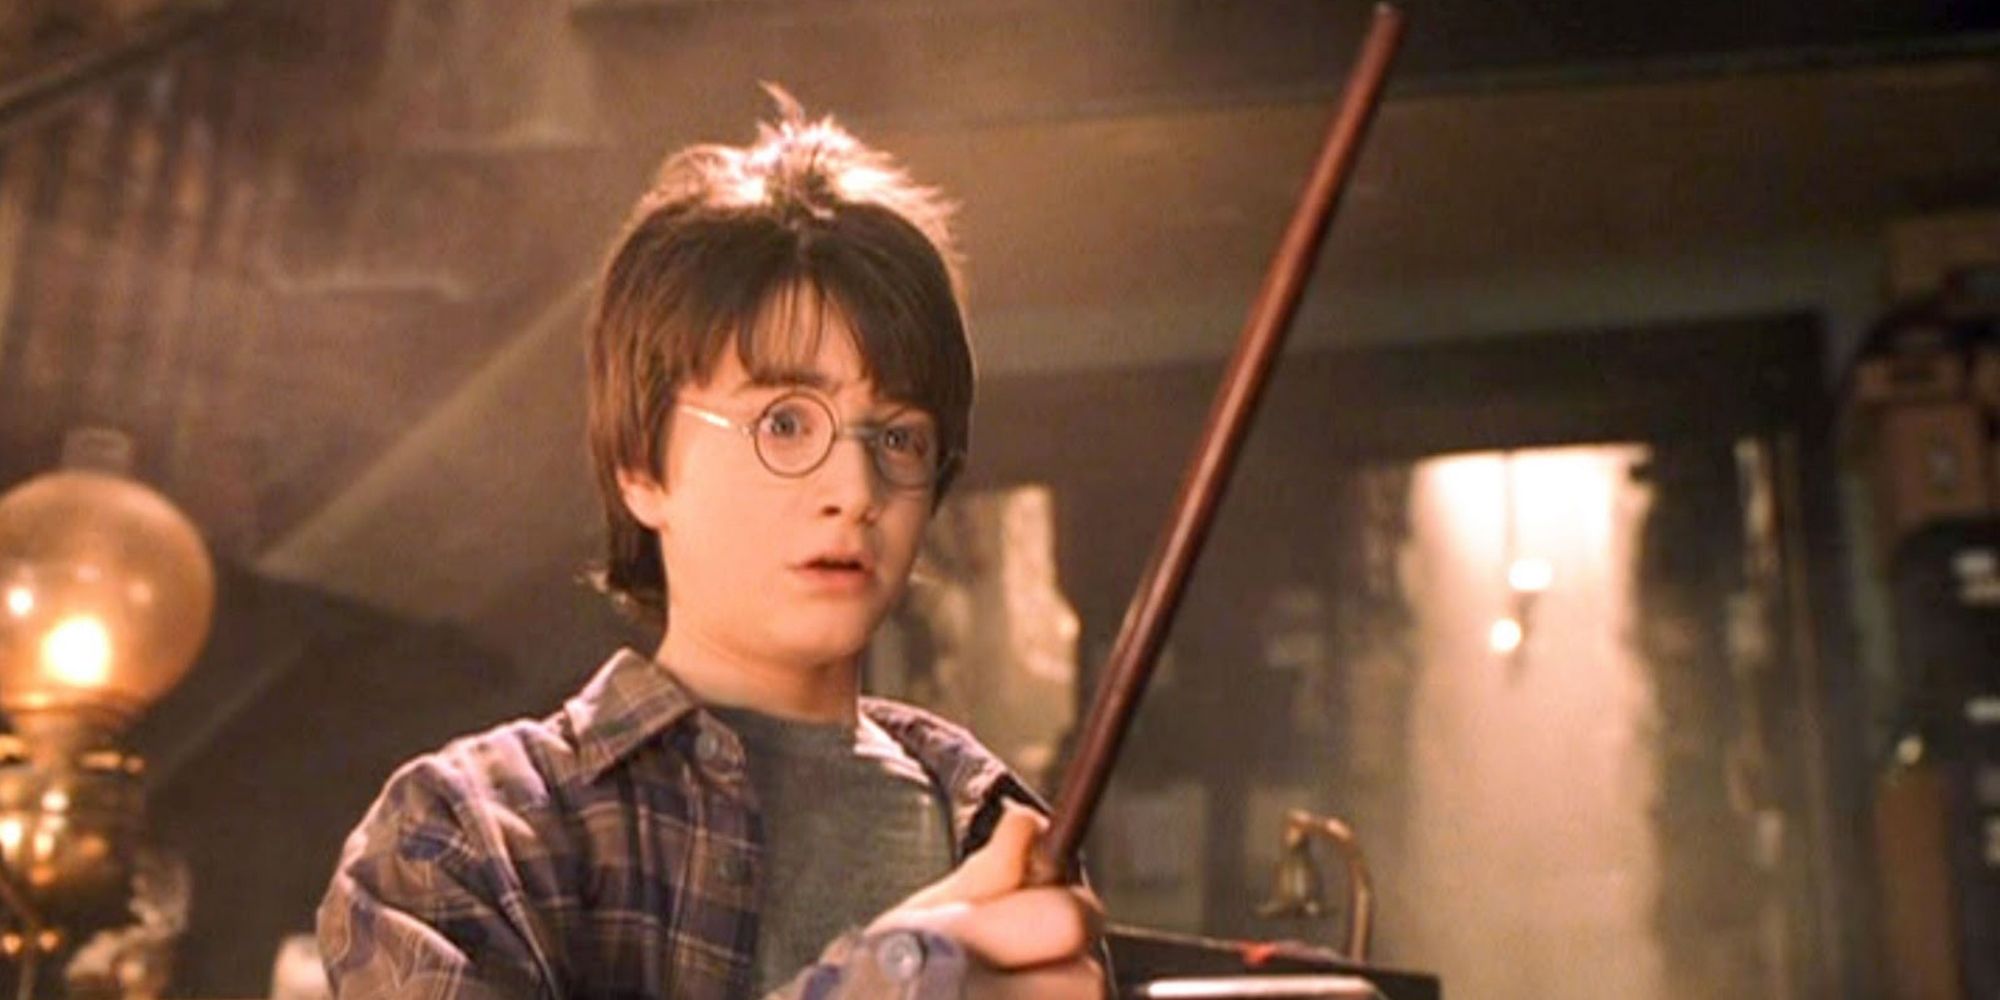 Harry Potter holding his first wand in 'Harry Potter and The Sorcerer's Stone'